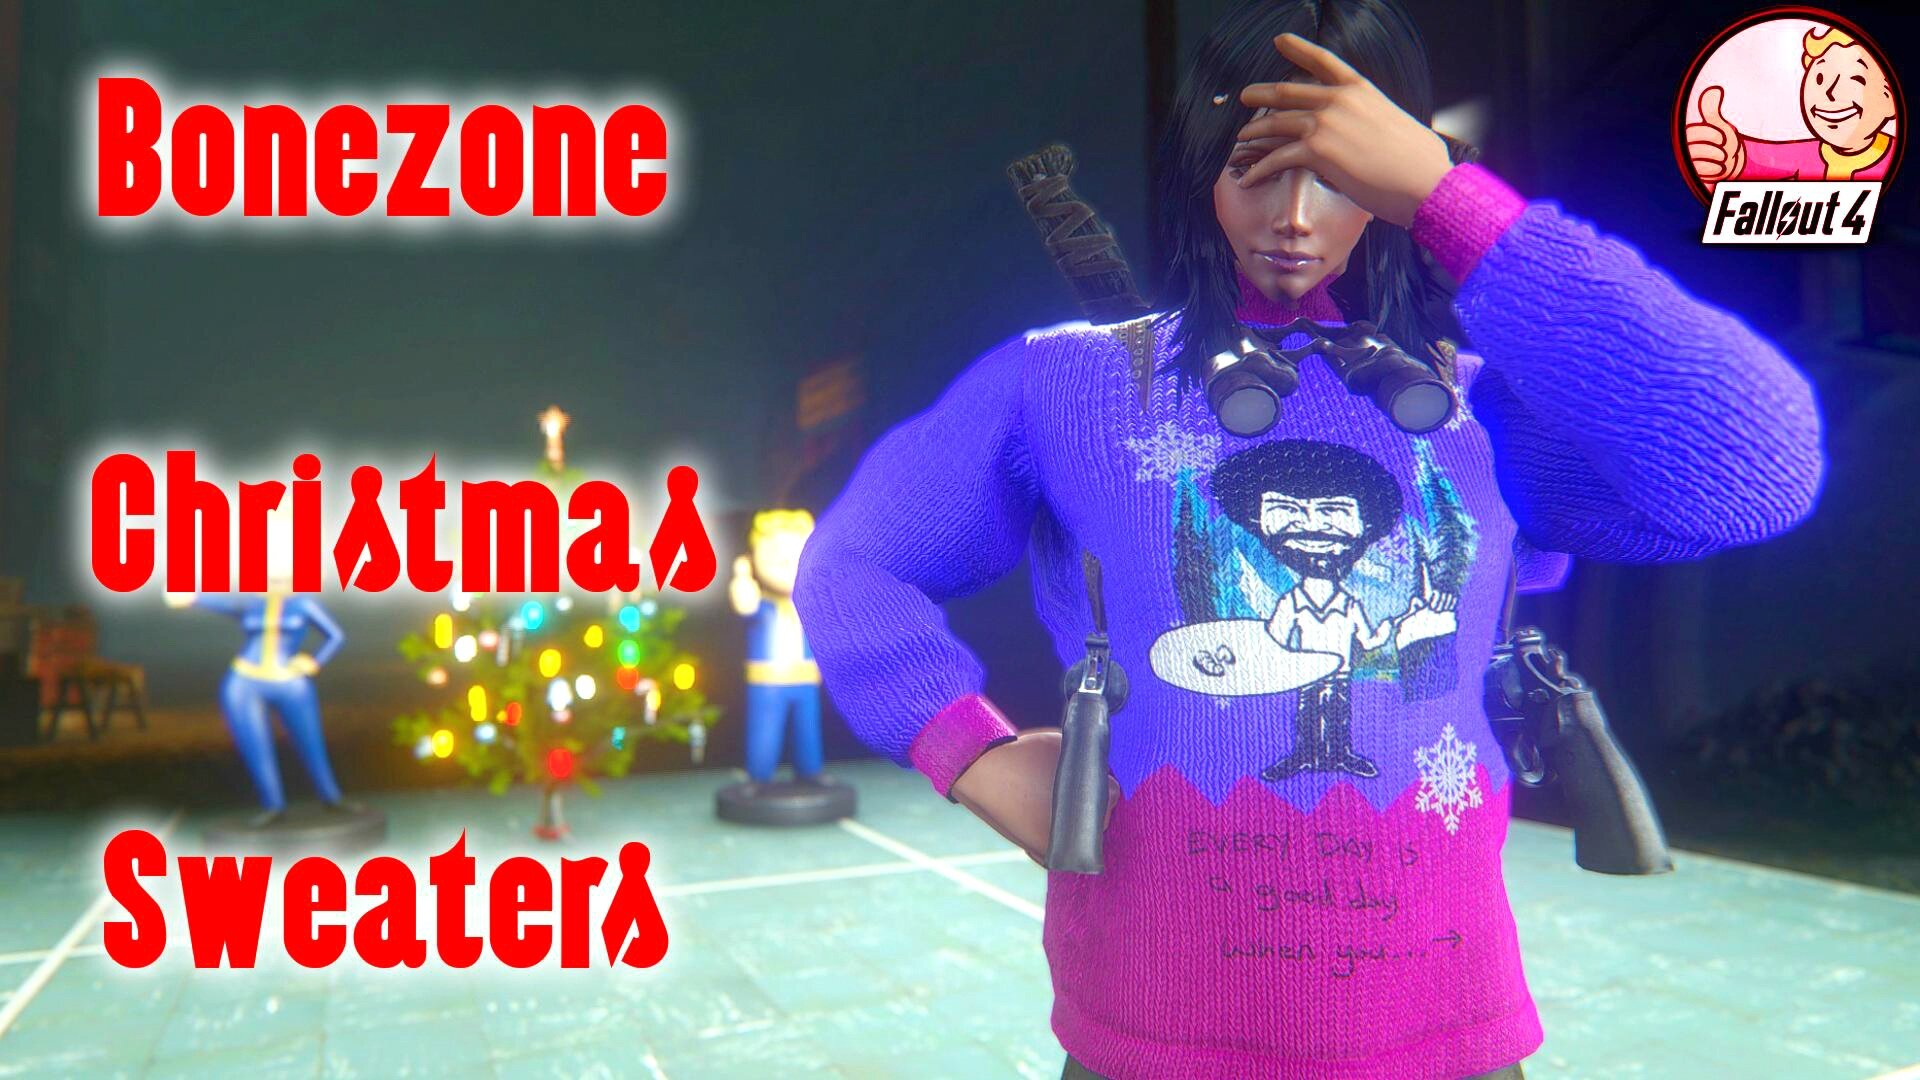 2033424038_BonezoneChristmasSweaters-Fallout4SMS.jpg.09c28b347caf83cd361661a15101c457.jpg